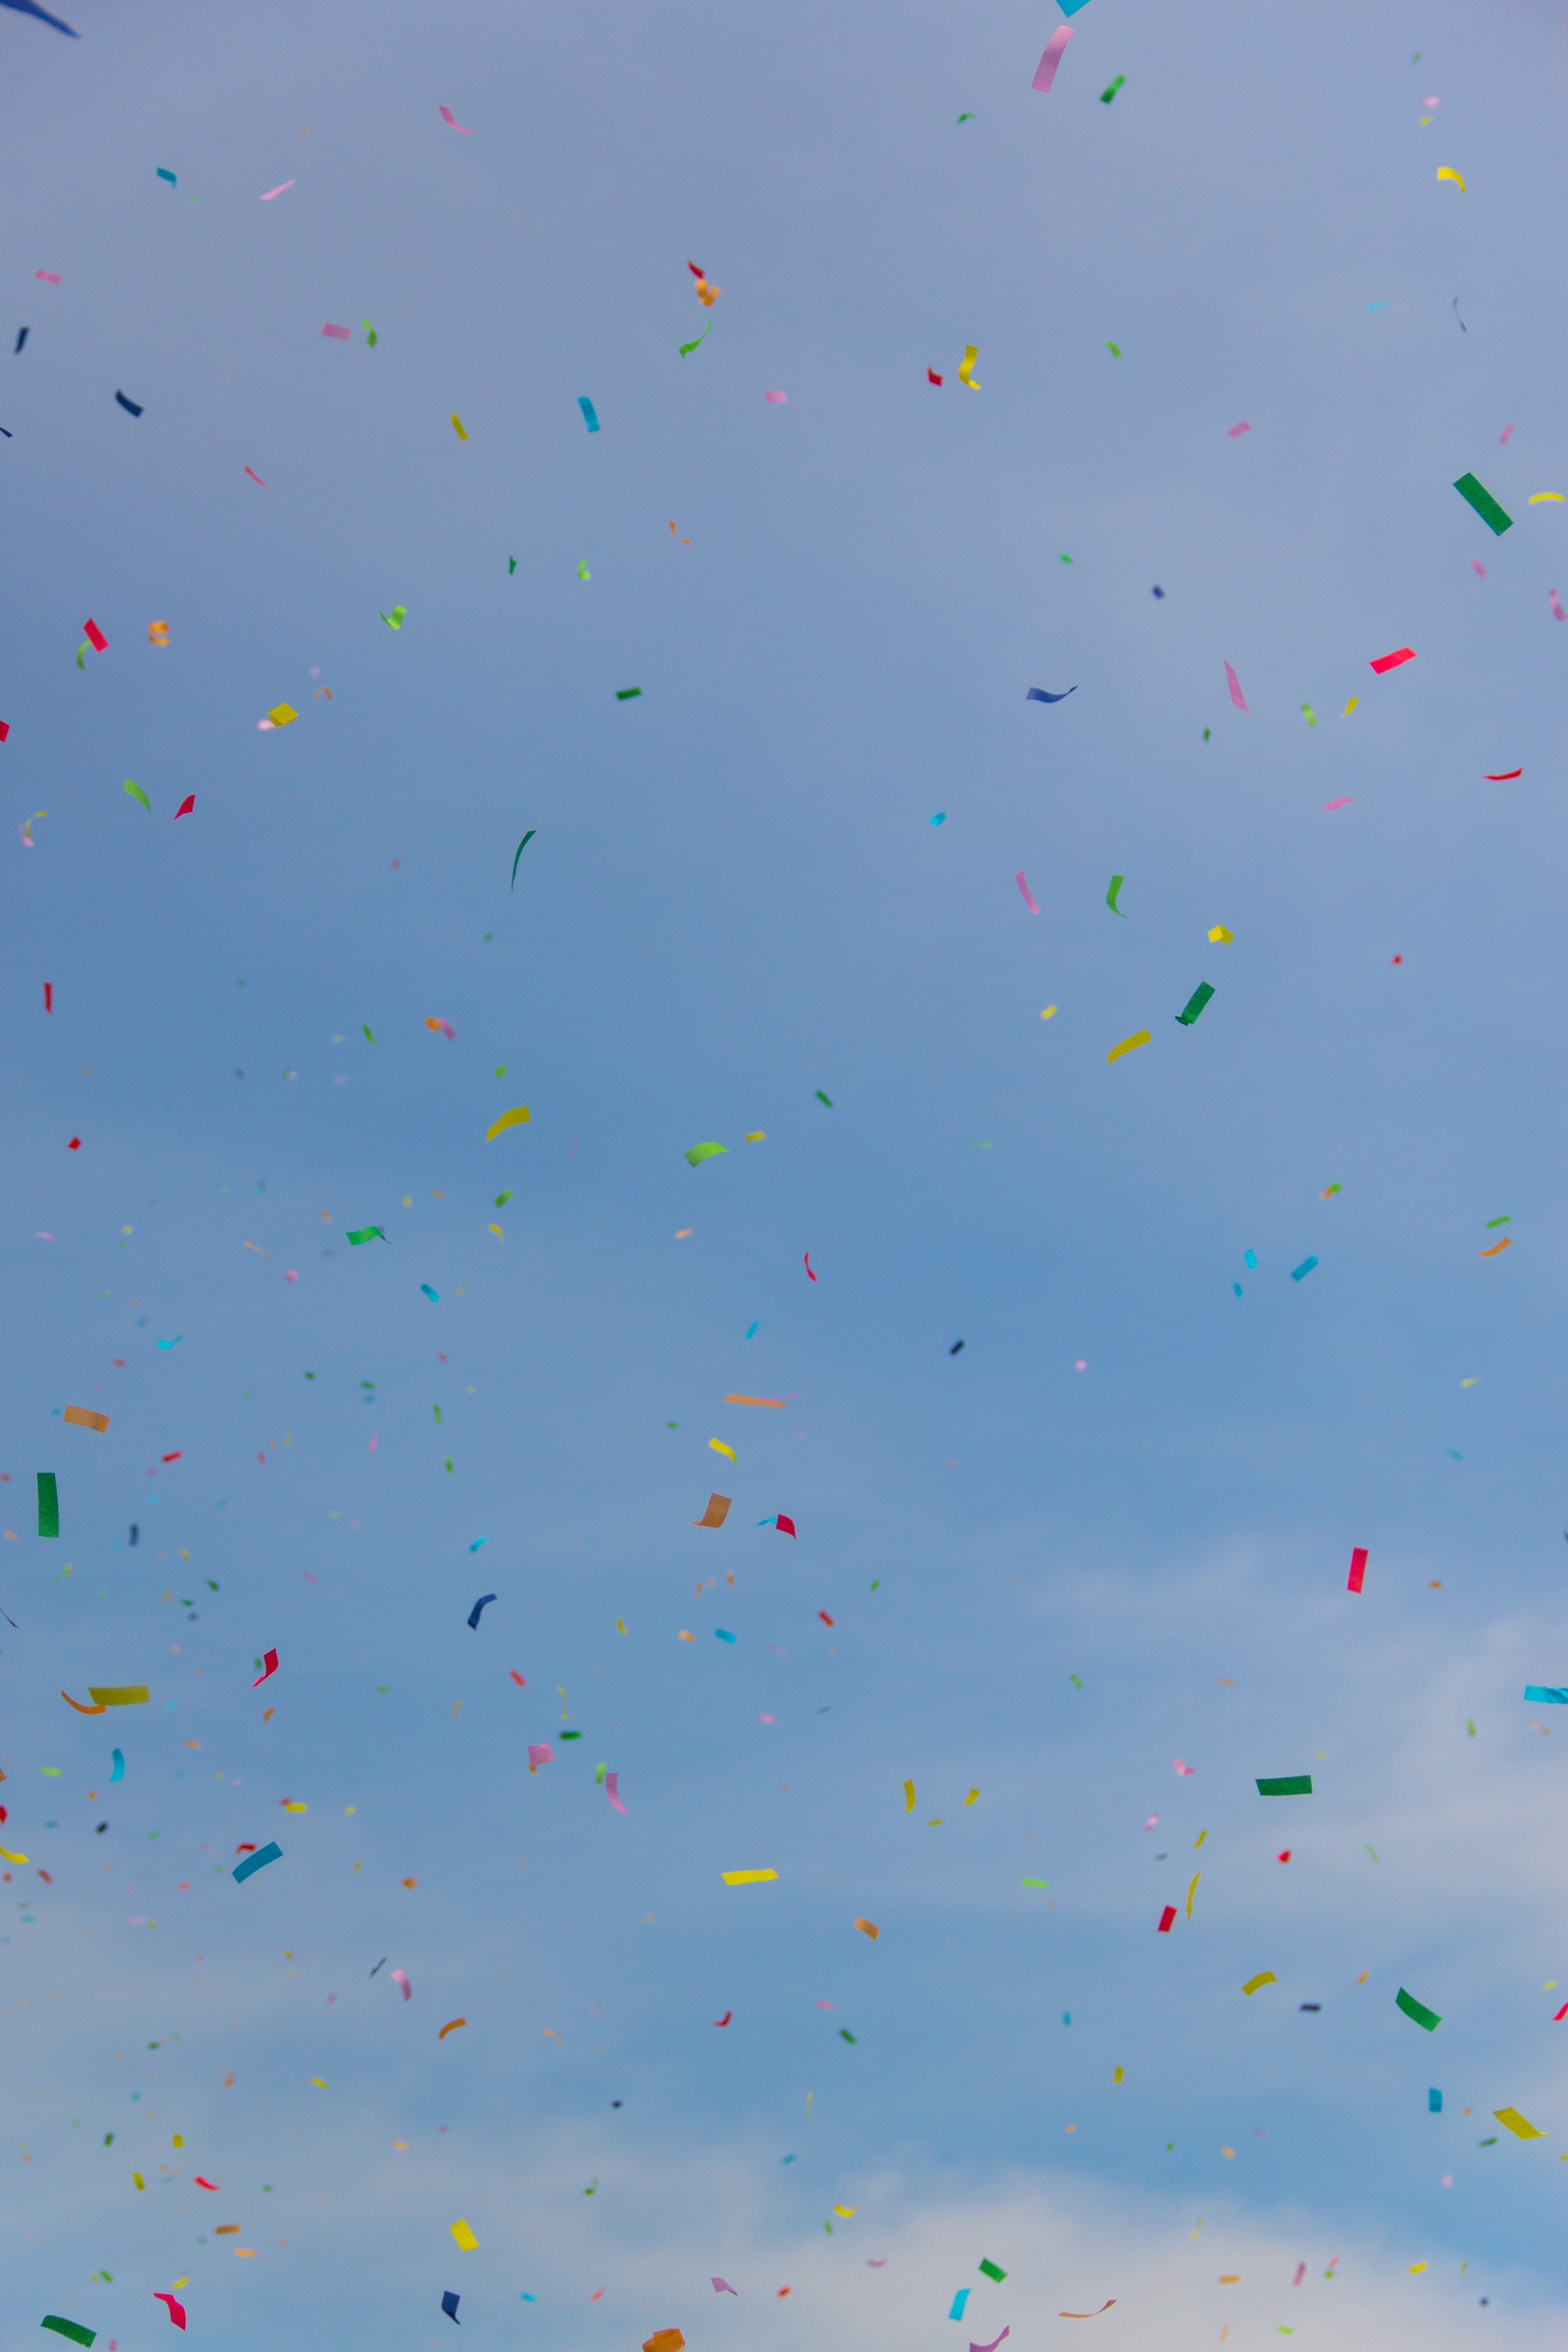 confetti falling from sky, Air, Merry, Party, backgrounds, multi Colored